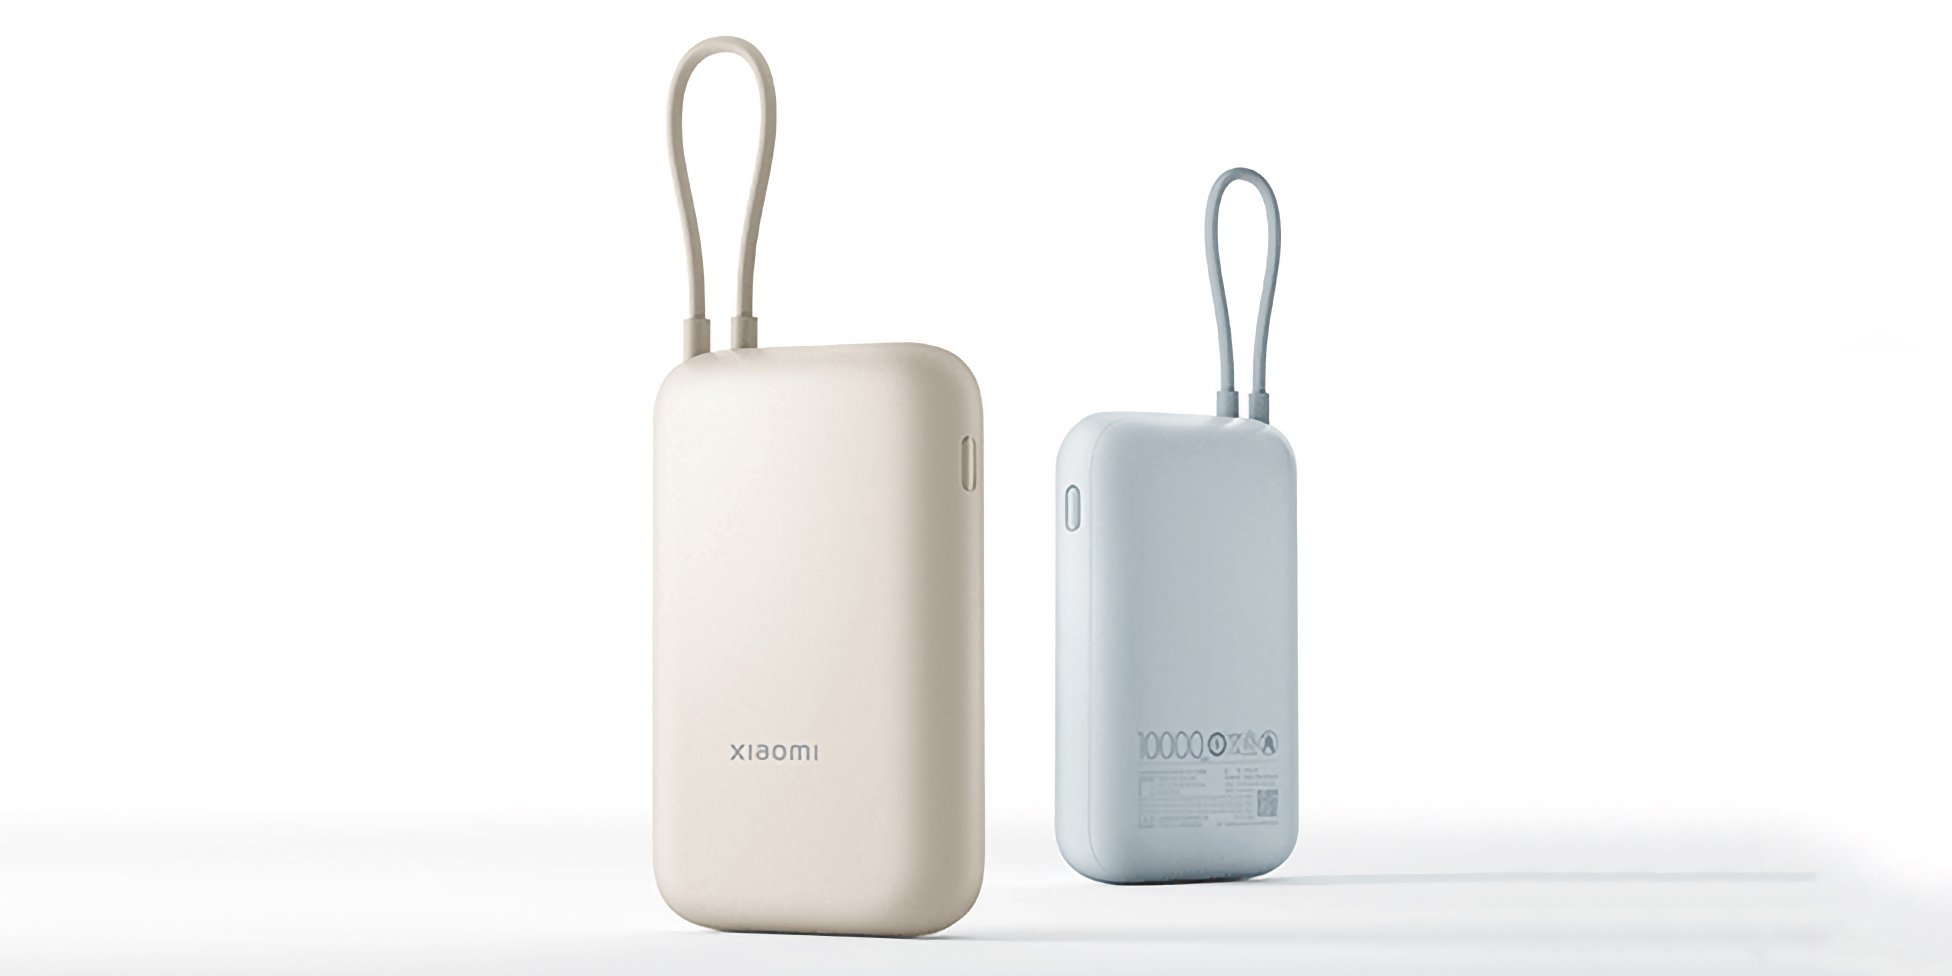 Xiaomi has introduced a pocket power bank for 10,000 mAh with a built-in cable